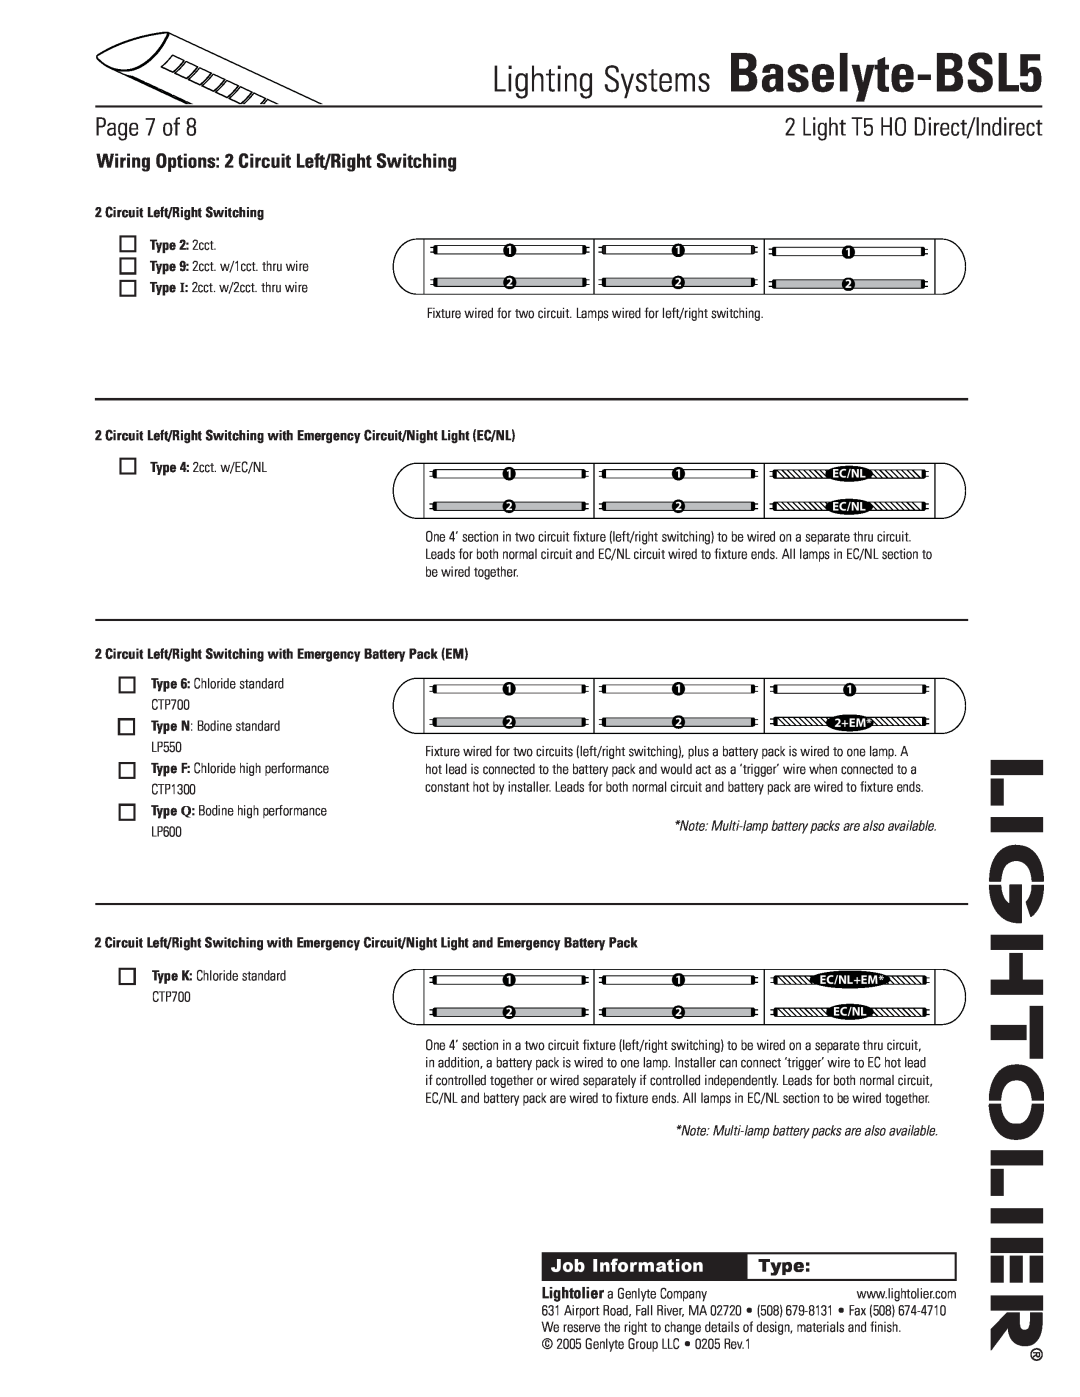 Lightolier Baselyte-BSL5 Wiring Options 2 Circuit Left/Right Switching, Circuit Left/Right Switching Type 2 2cct, Page of 